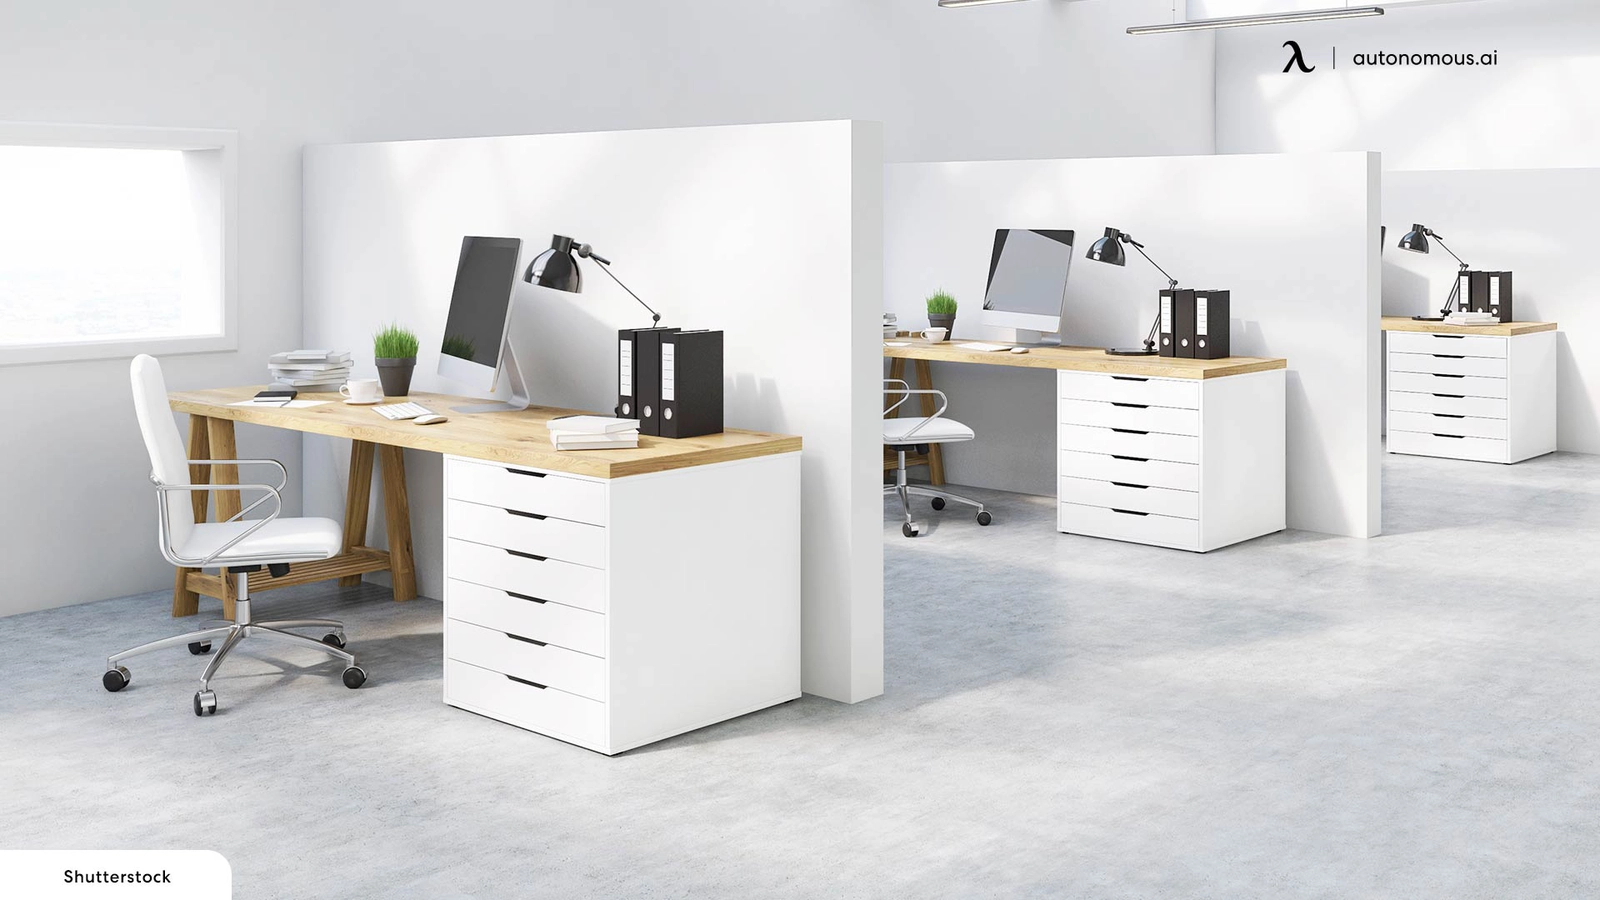 10 Best 10x10 Office Layout Ideas for a Small Space